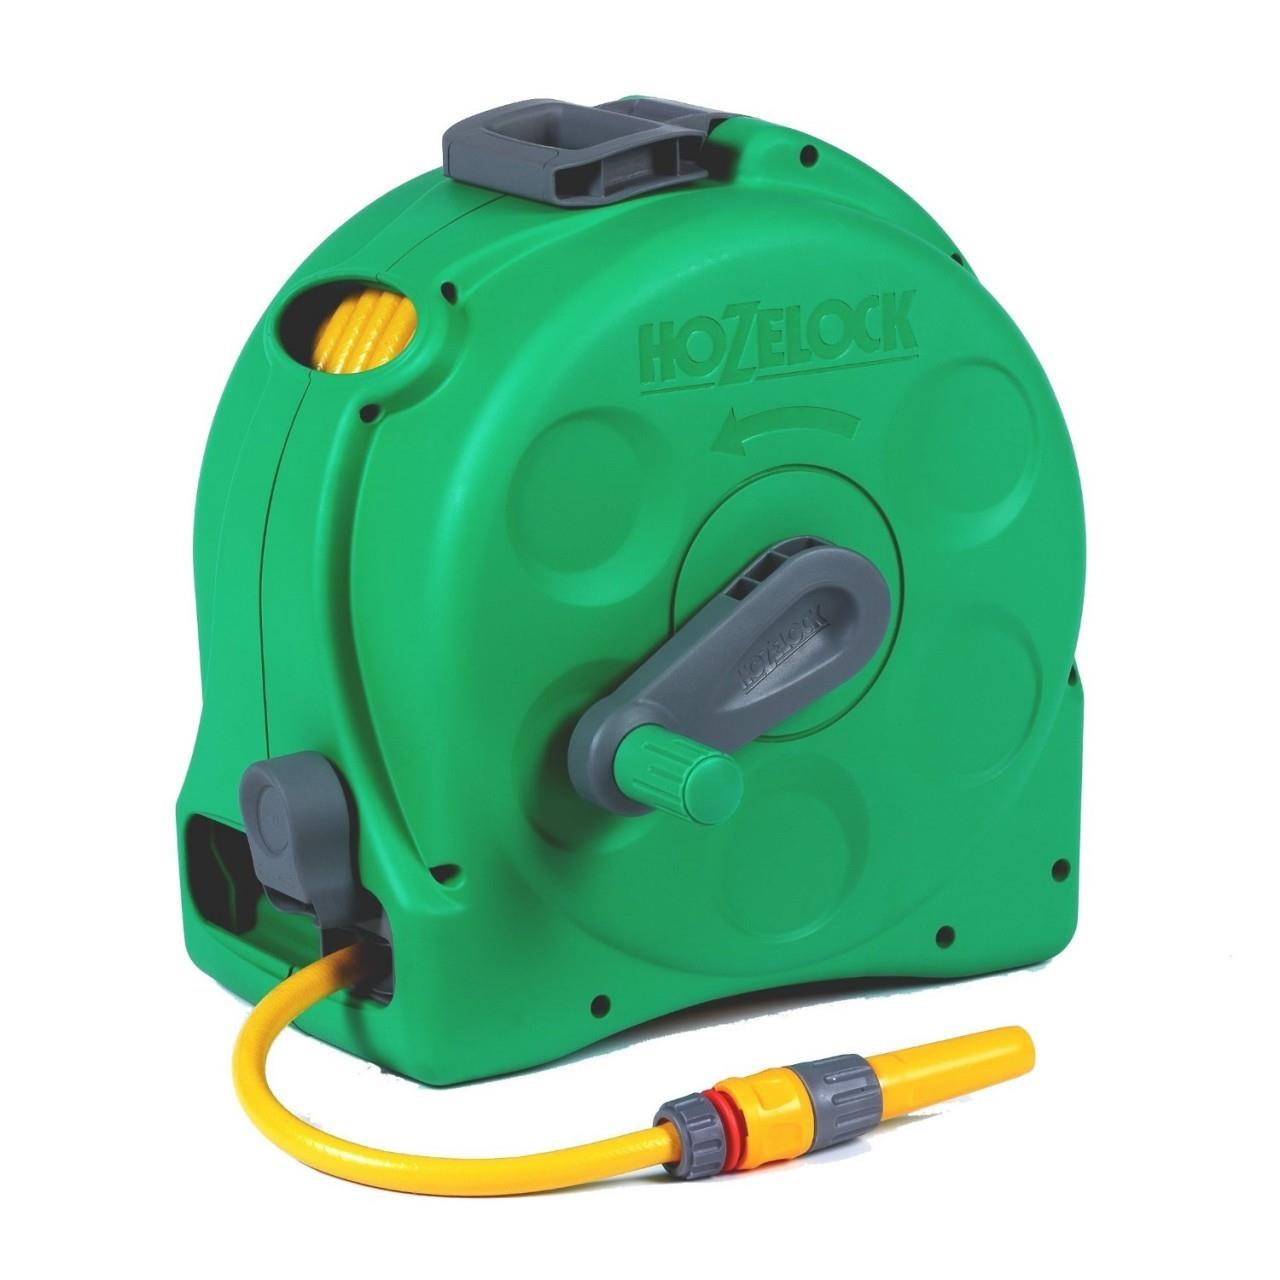 Hozelock 2415 2 in 1 Compact Reel and 25m Hose - HOZ2415 